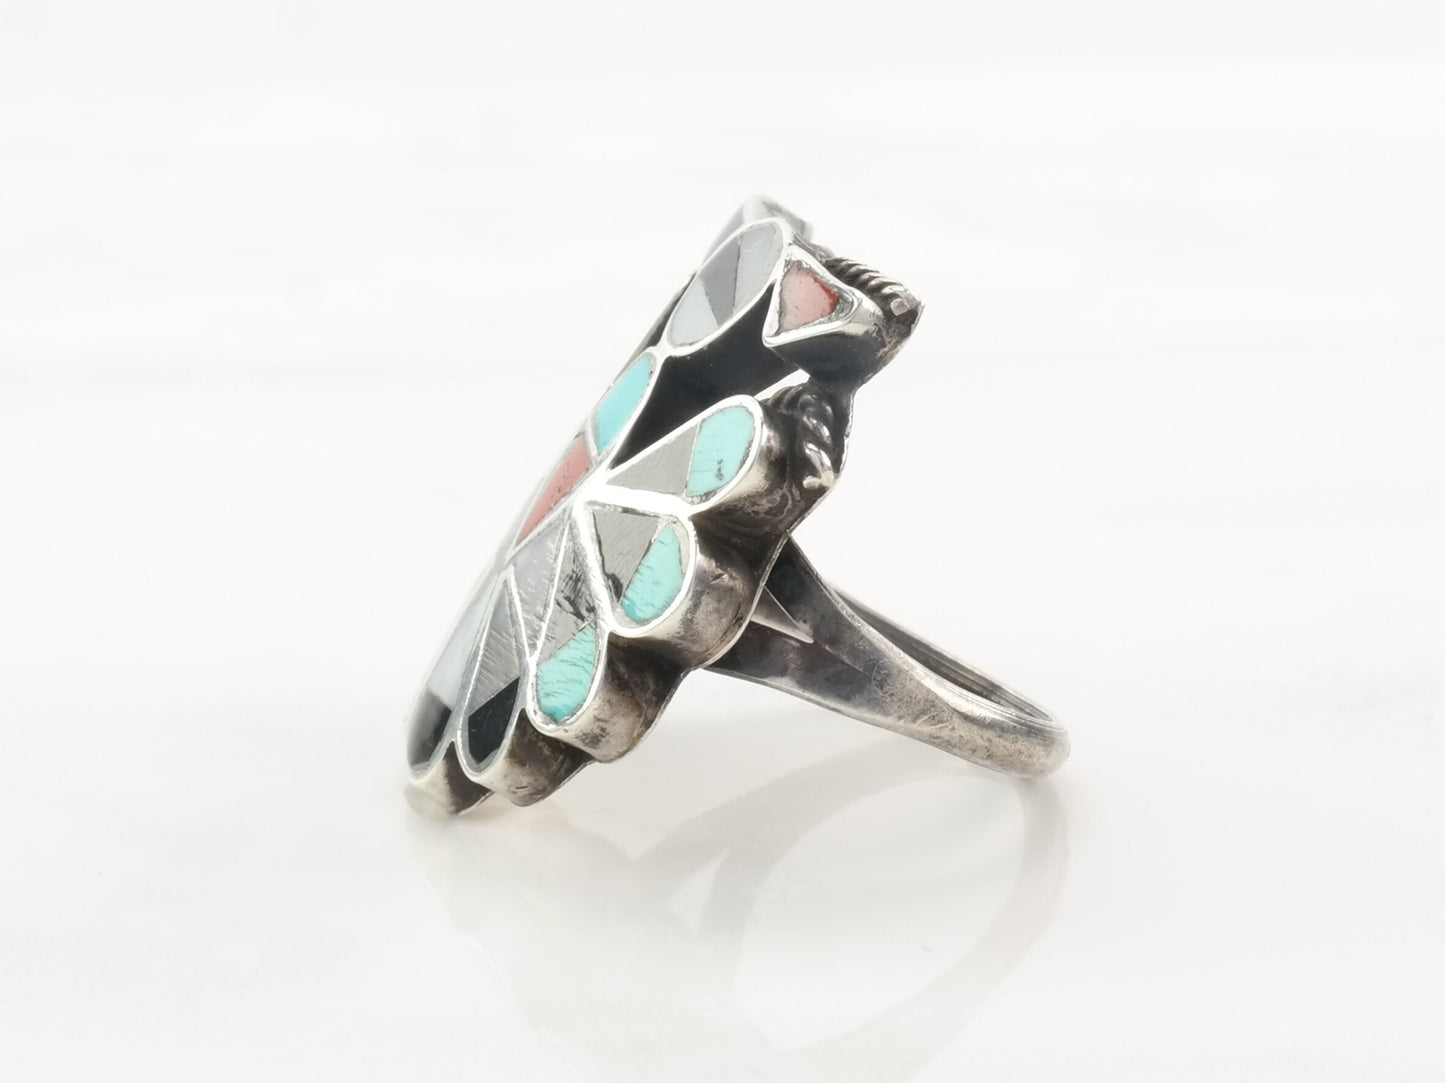 Vintage Native American Silver Ring Peyote Inlay, Bird Sterling Size 8 3/4